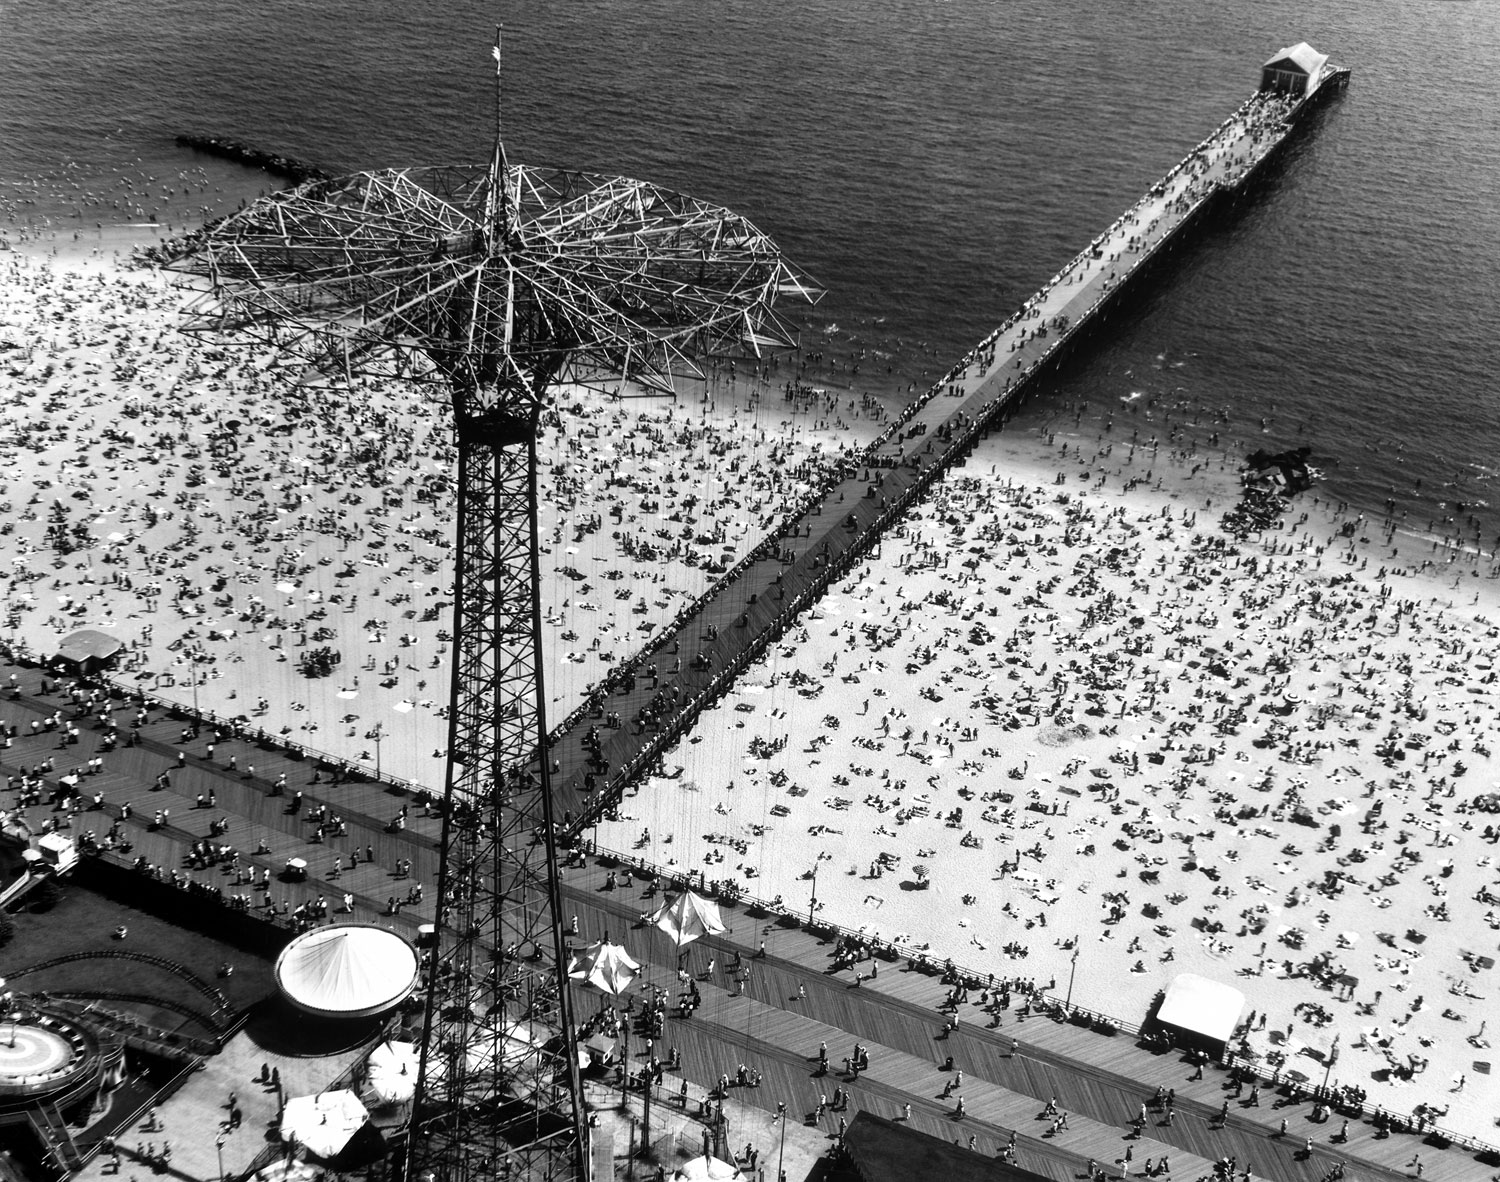 Aerial view of the crowded beach and pier at Coney Island, including the Parachute Jump amusement park ride (the tall structure at left) in Brooklyn, New York, 1951.